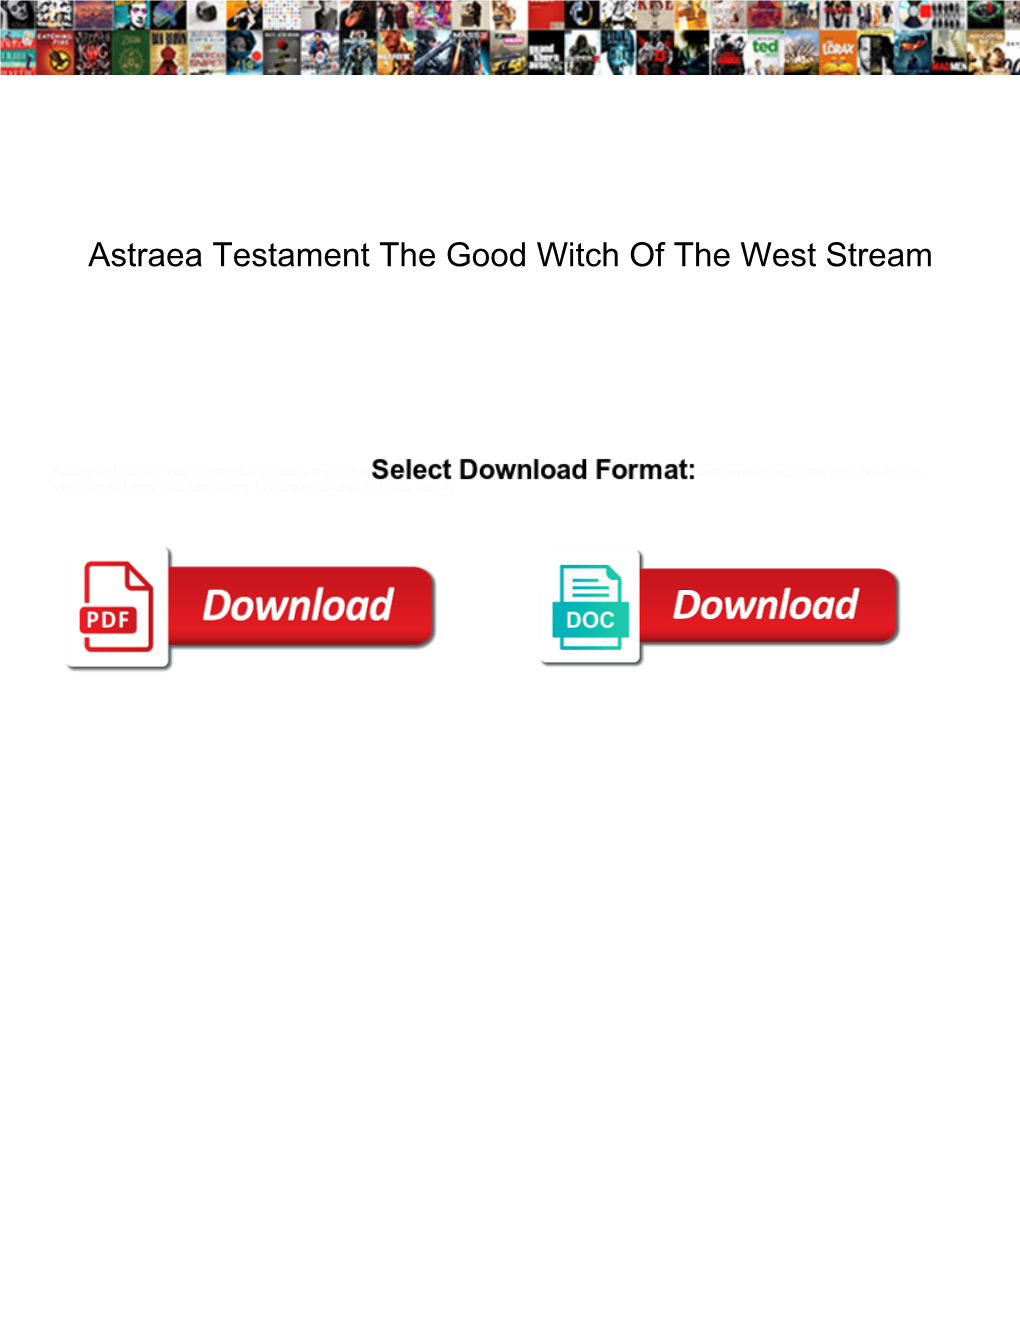 Astraea Testament the Good Witch of the West Stream